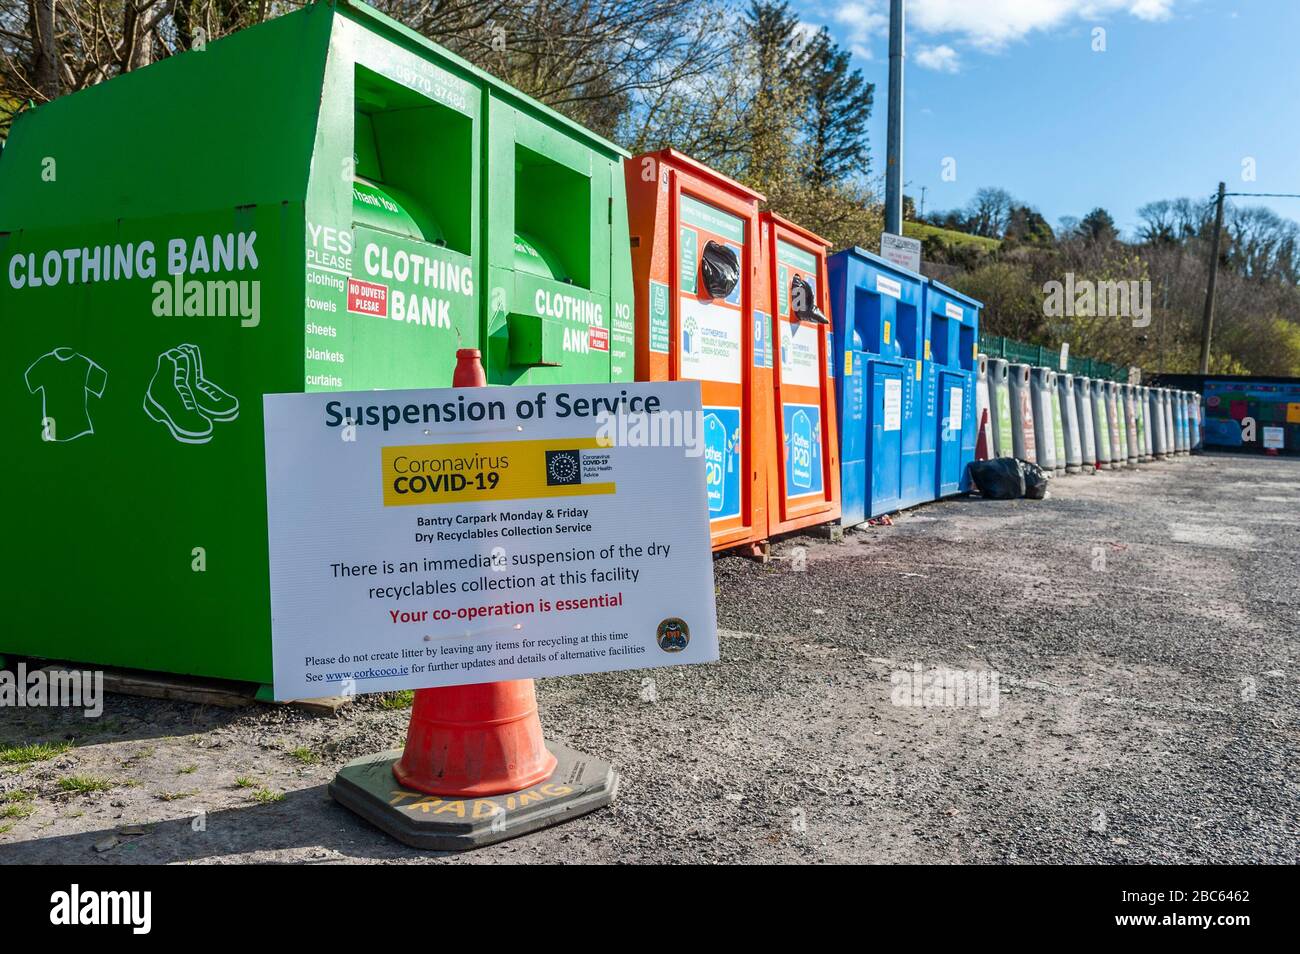 Bantry, West Cork, Ireland. 3rd Apr, 2020. The Bantry free recycling collection service has been suspended due to the Covid-19 pandemic. The service, which takes place in SuperValu car park on Monday and Friday afternoons, has been suspended until further notice. Despite no dumping signs, rubbish has been dumped near the bottle and clothing collection bins. Credit: Andy Gibson/Alamy Live News Stock Photo